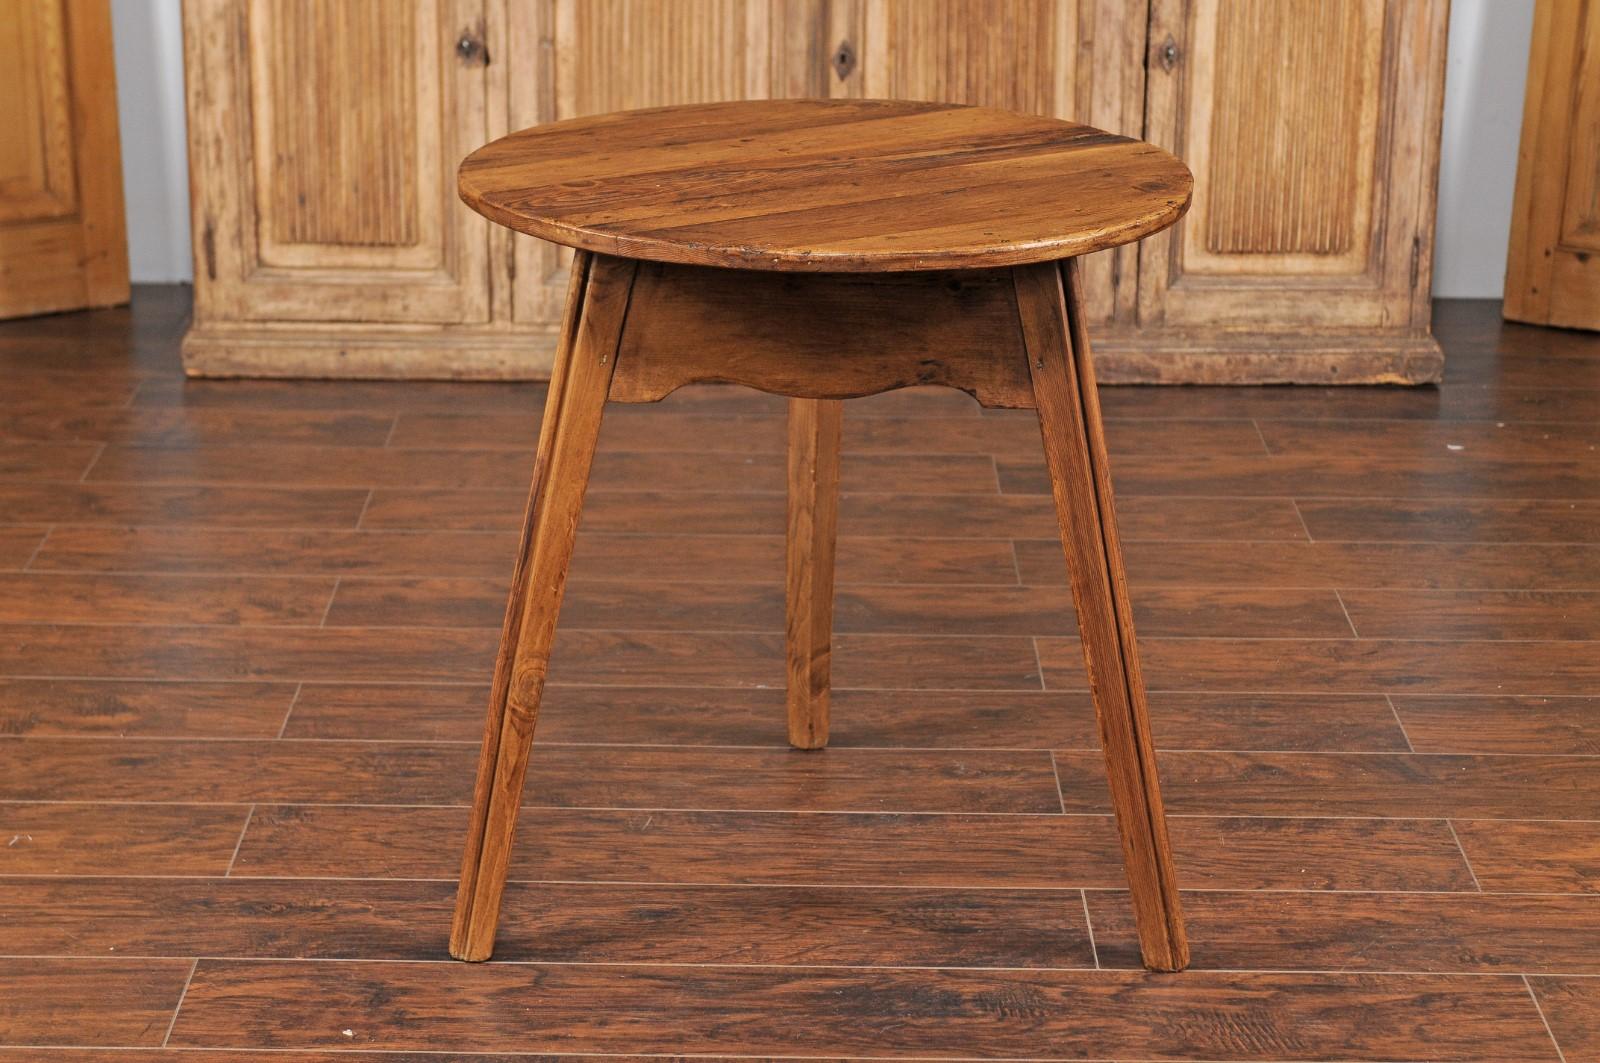 20th Century English Turn of the Century Pine Cricket Table with Scalloped Apron, circa 1900 For Sale